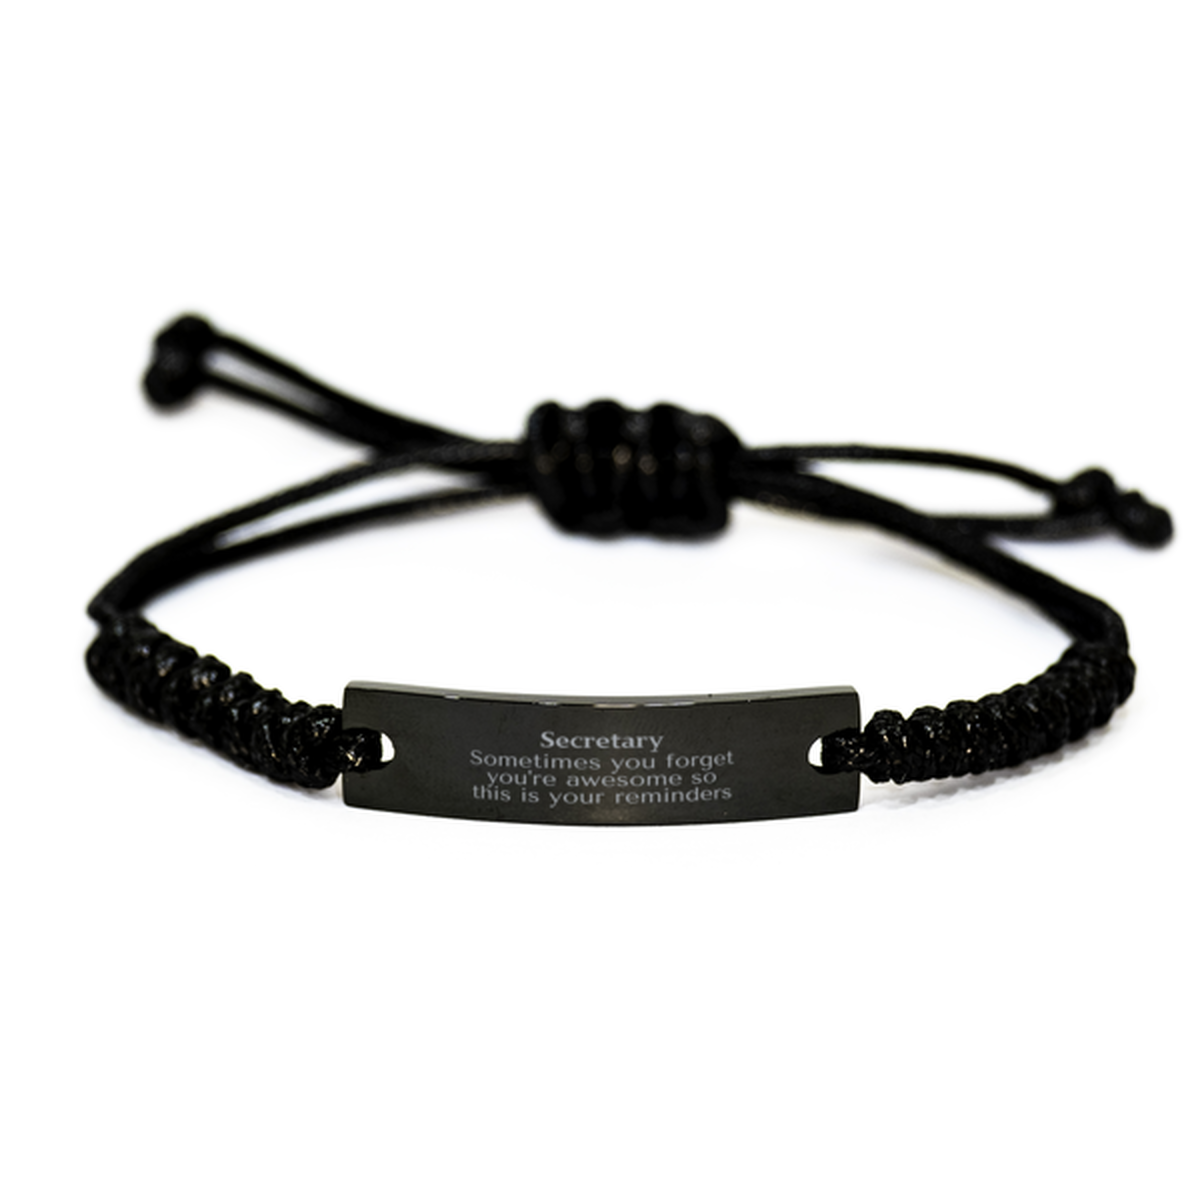 Sentimental Secretary Black Rope Bracelet, Secretary Sometimes you forget you're awesome so this is your reminders, Graduation Christmas Birthday Gifts for Secretary, Men, Women, Coworkers